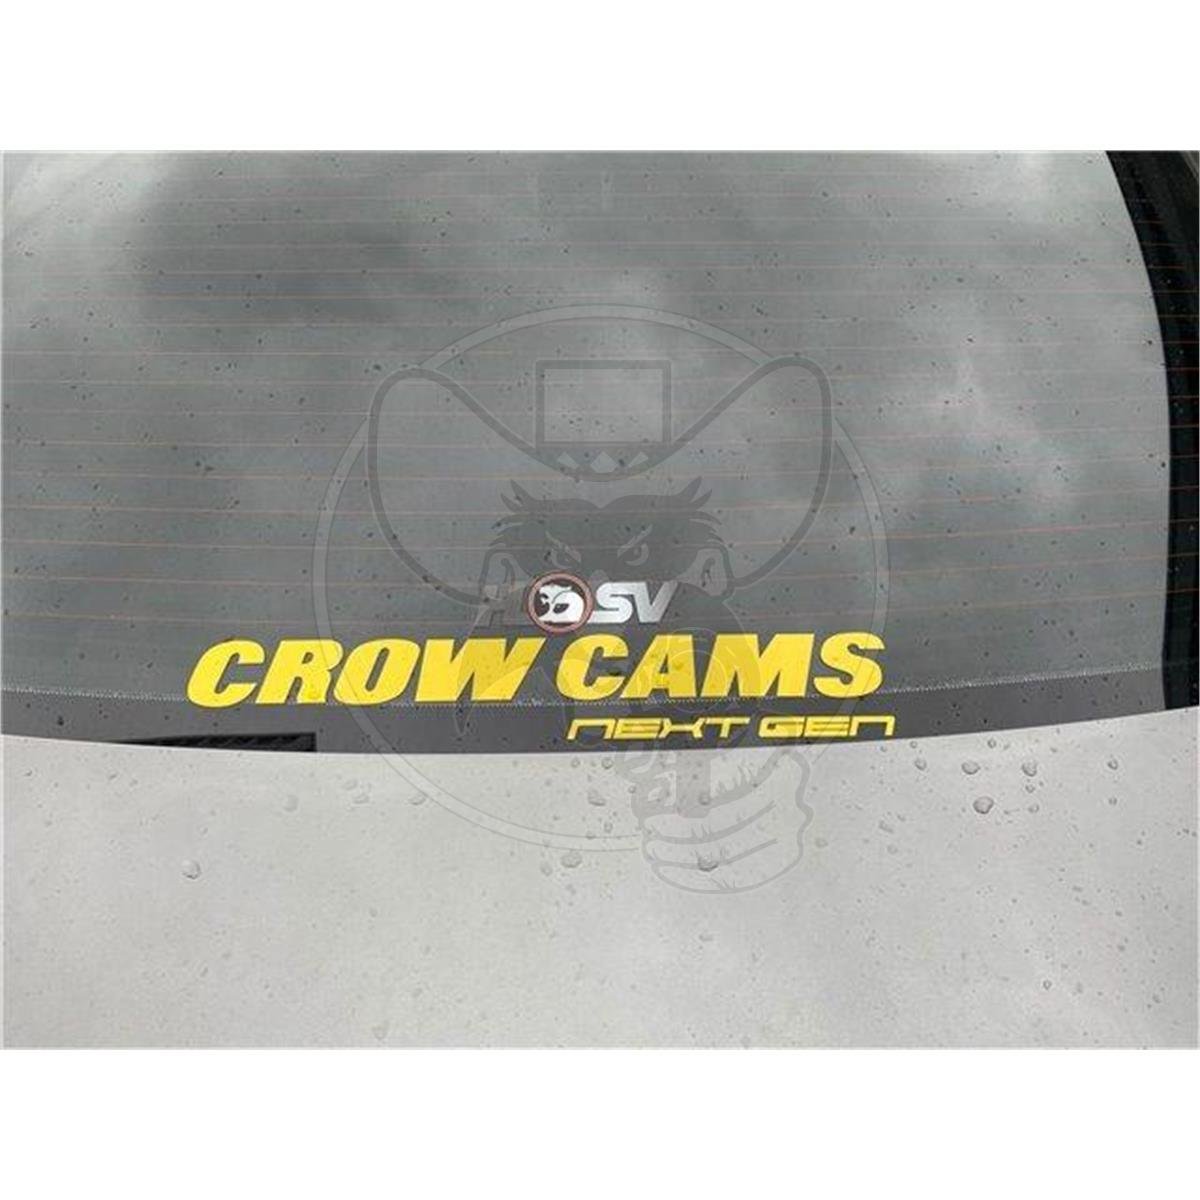 CROW CAMS 450MM YELLOW STICKER